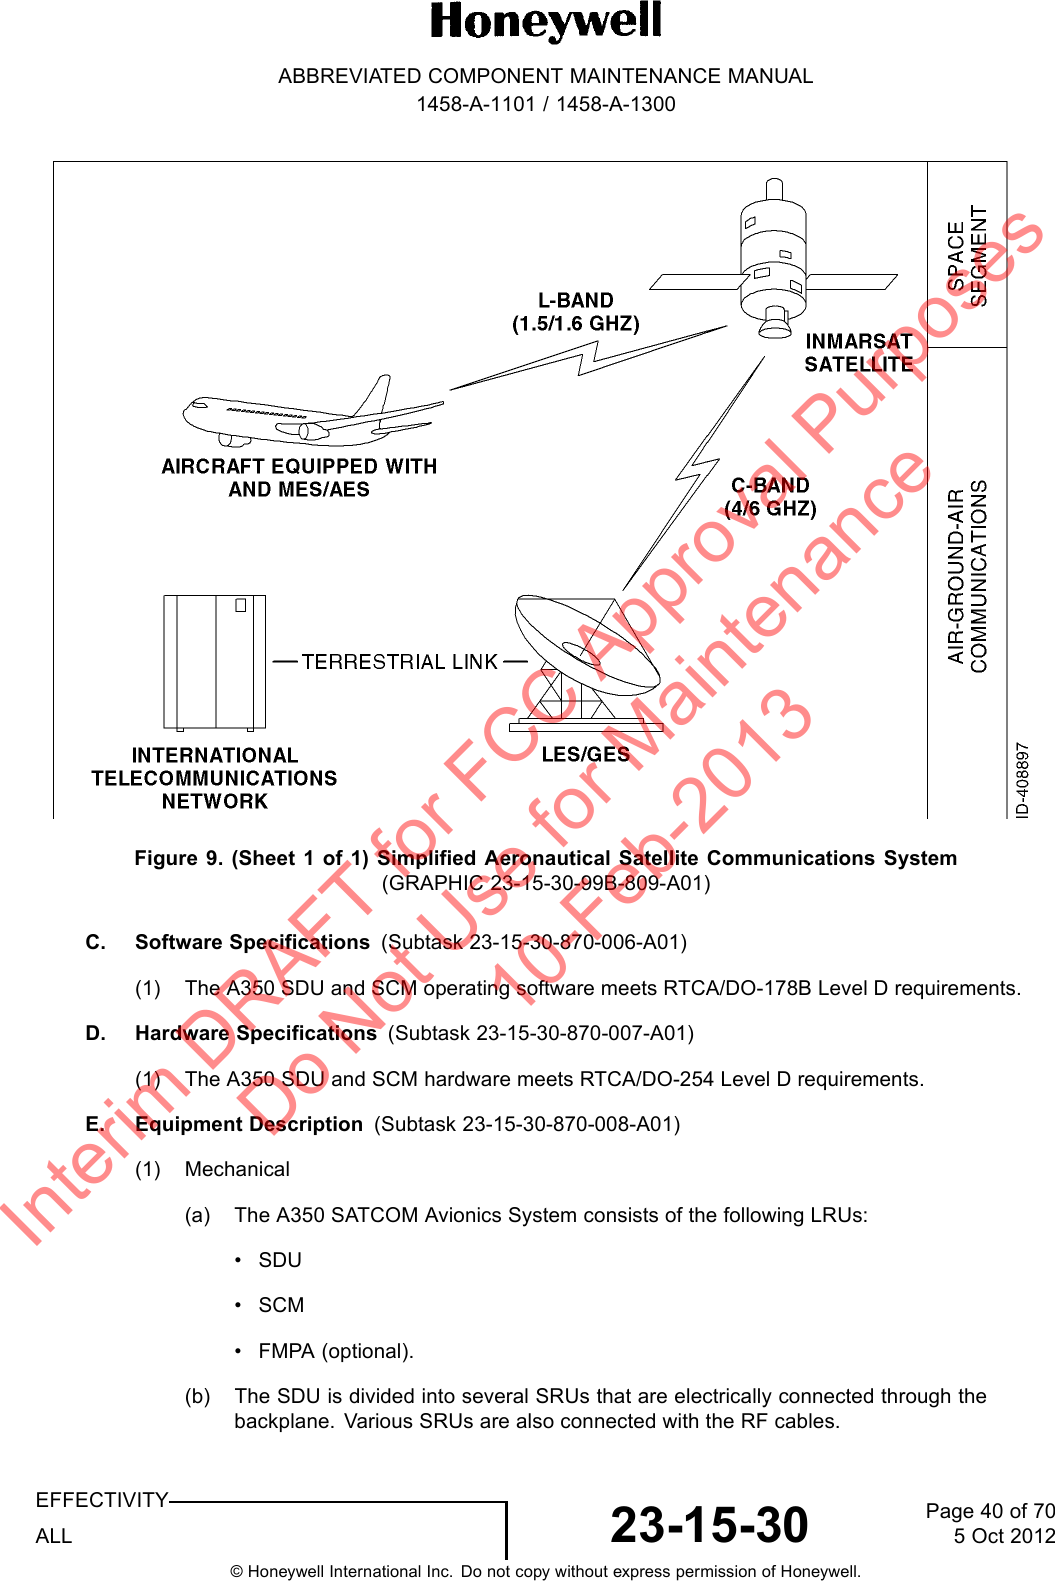 ABBREVIATED COMPONENT MAINTENANCE MANUAL1458-A-1101 / 1458-A-1300Figure 9. (Sheet 1 of 1) Simplified Aeronautical Satellite Communications System(GRAPHIC 23-15-30-99B-809-A01)C. Software Specifications (Subtask 23-15-30-870-006-A01)(1) The A350 SDU and SCM operating software meets RTCA/DO-178B Level D requirements.D. Hardware Specifications (Subtask 23-15-30-870-007-A01)(1) The A350 SDU and SCM hardware meets RTCA/DO-254 Level D requirements.E. Equipment Description (Subtask 23-15-30-870-008-A01)(1) Mechanical(a) The A350 SATCOM Avionics System consists of the following LRUs:•SDU•SCM• FMPA (optional).(b) The SDU is divided into several SRUs that are electrically connected through thebackplane. Various SRUs are also connected with the RF cables.EFFECTIVITYALL 23-15-30 Page 40 of 705 Oct 2012© Honeywell International Inc. Do not copy without express permission of Honeywell.Interim DRAFT for FCC Approval Purposes Do Not Use for Maintenance 10-Feb-2013